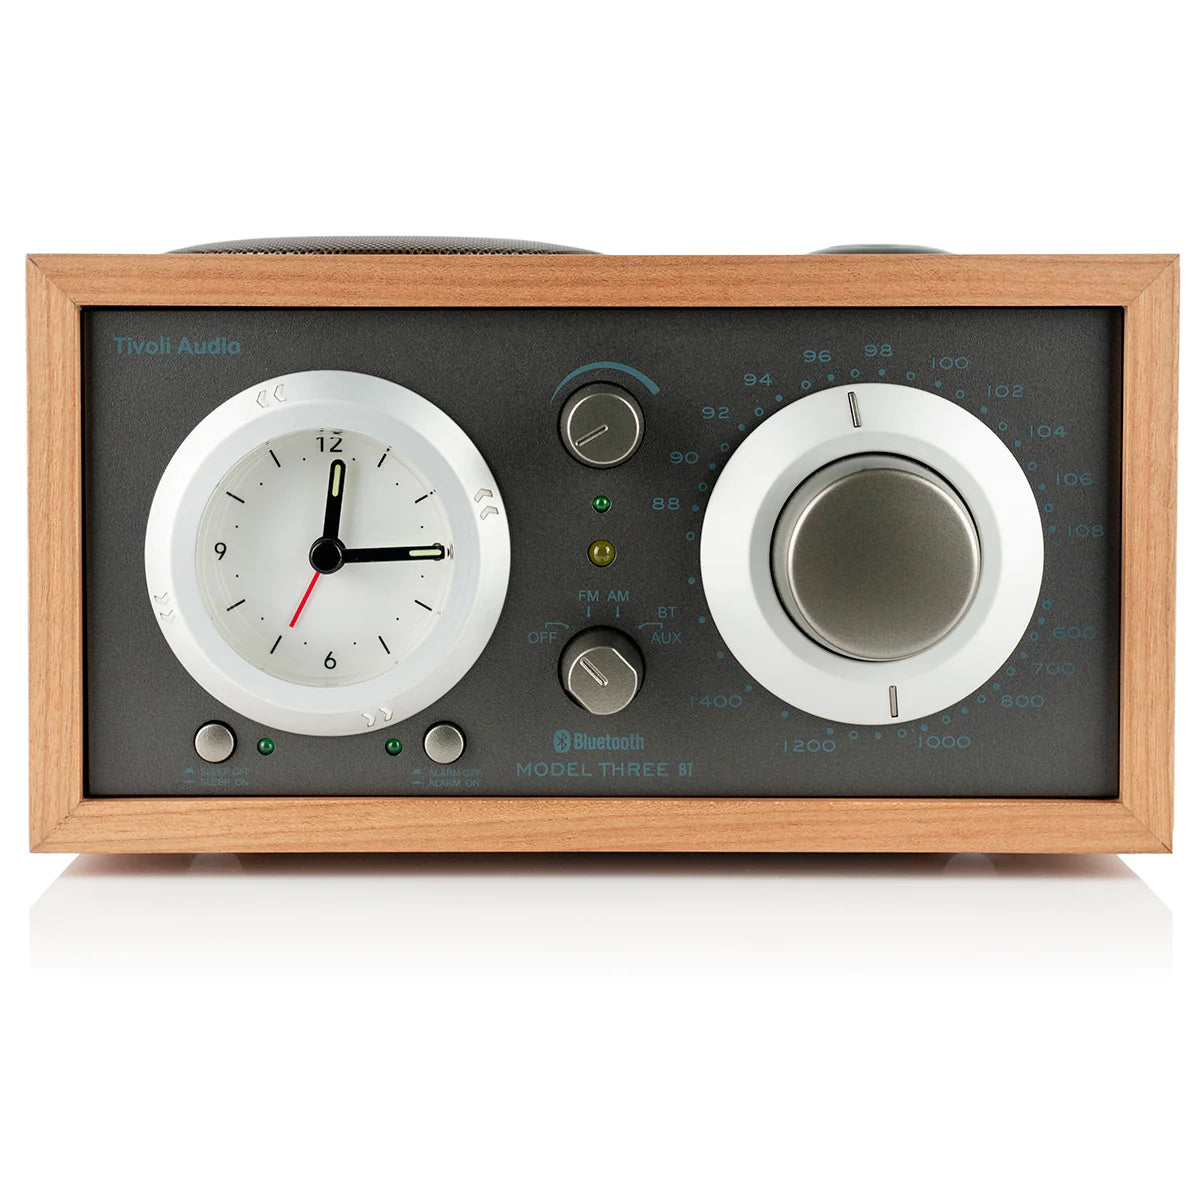 The Tivoli Audio Model Three BT blends classic design, superior sound and Bluetooth connectivity. Front Cherry Black image